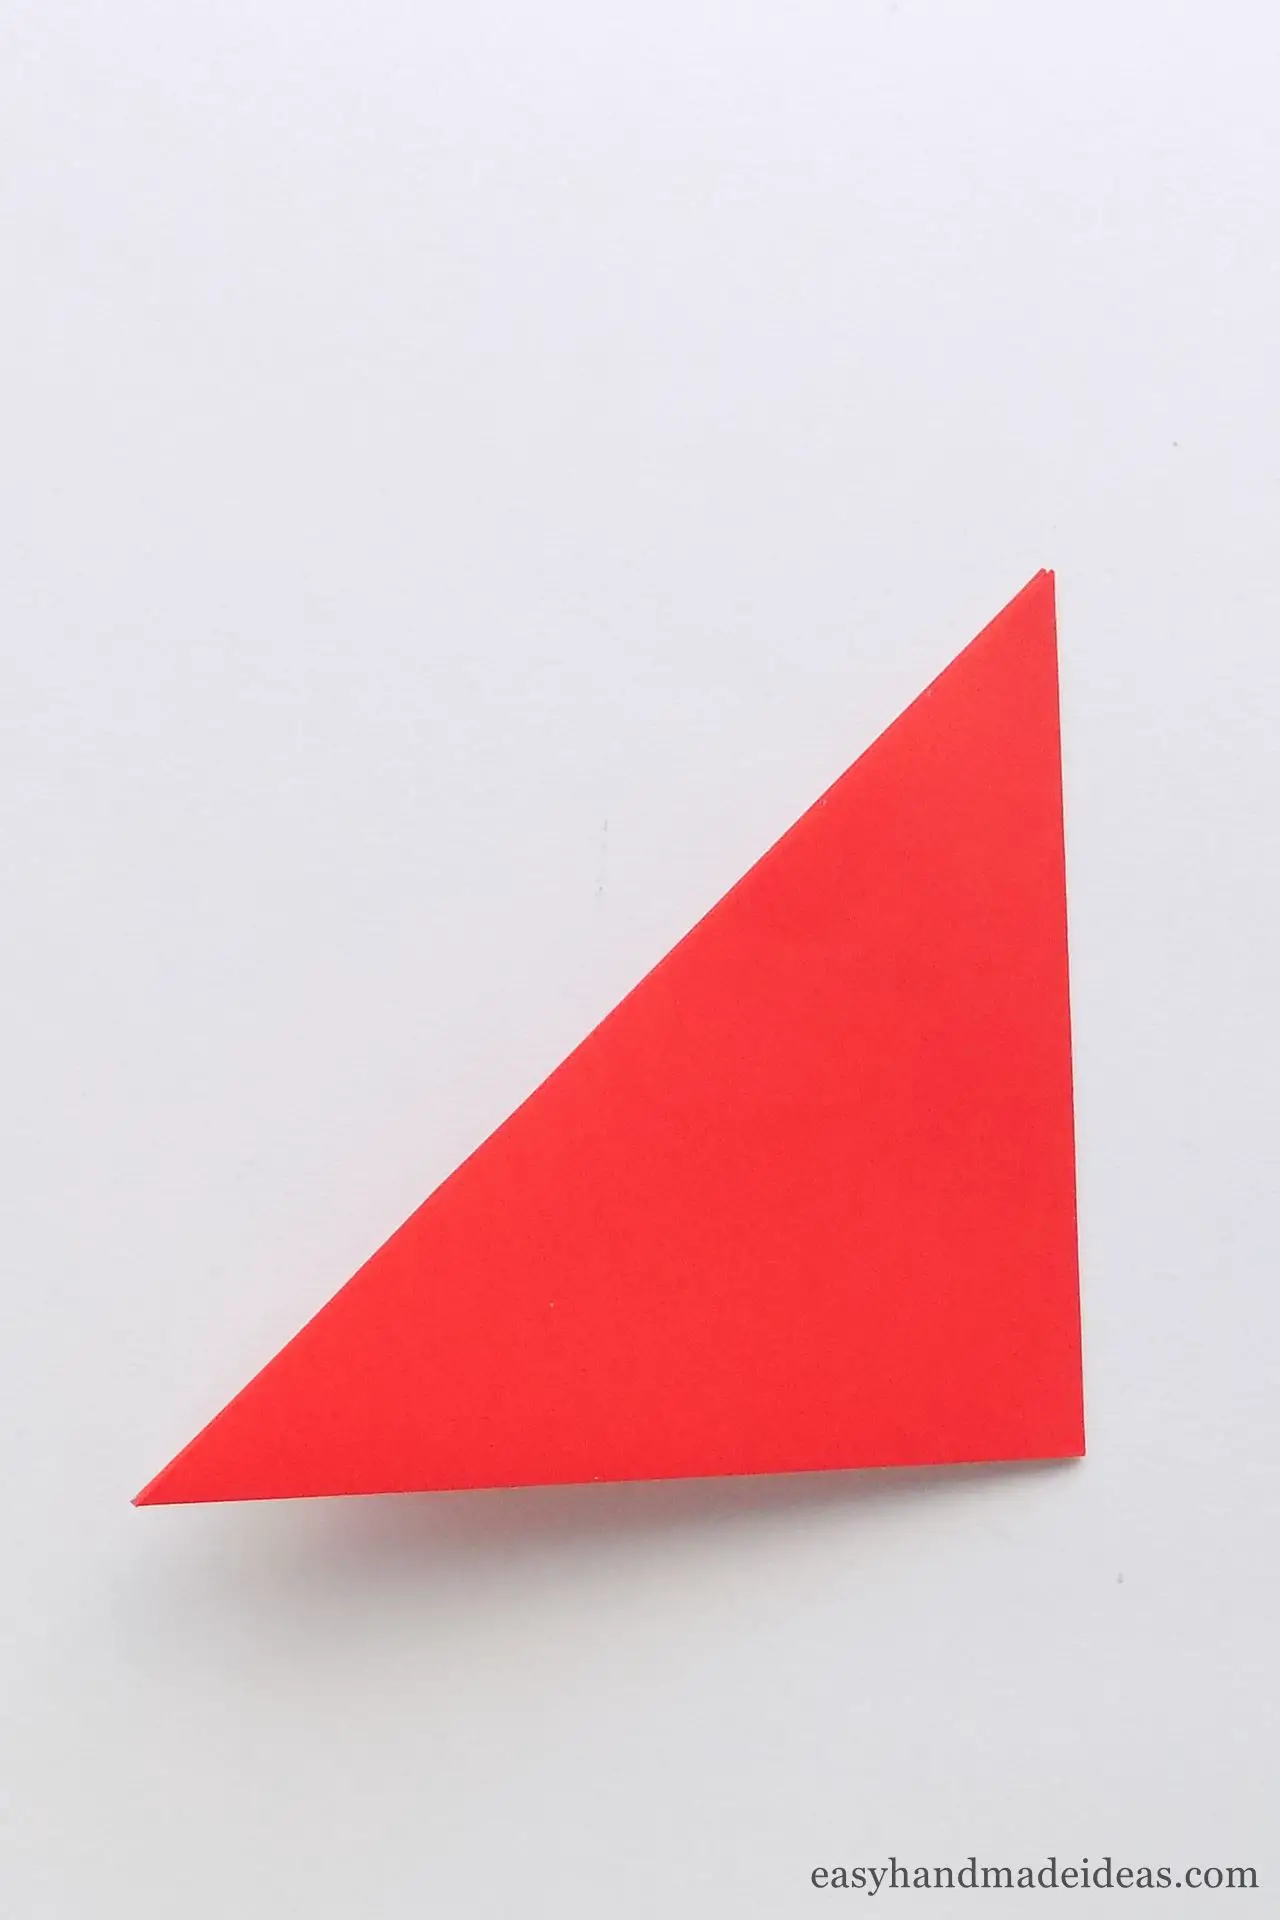 Fold the triangle in half by joining the bottom corners